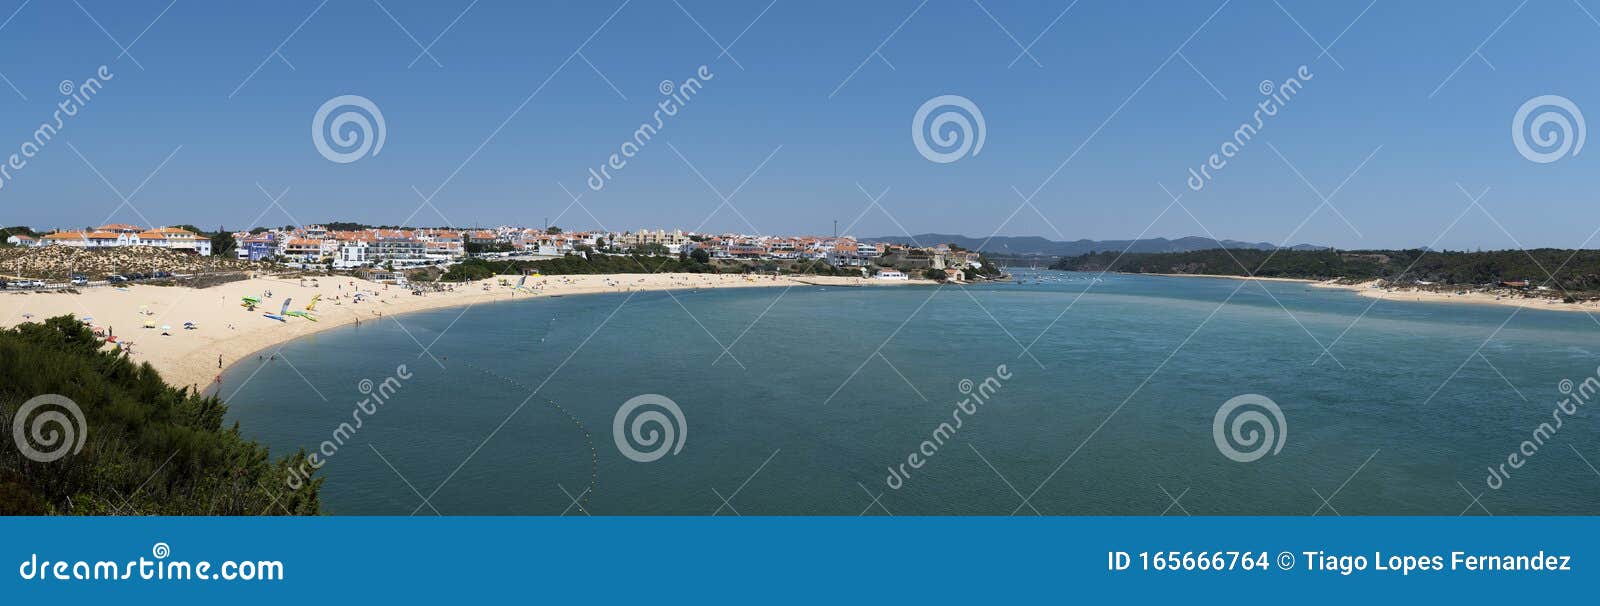 panoramic view of the village of vila nova de mil fontes with the beach and the mira river mouth in alentejo